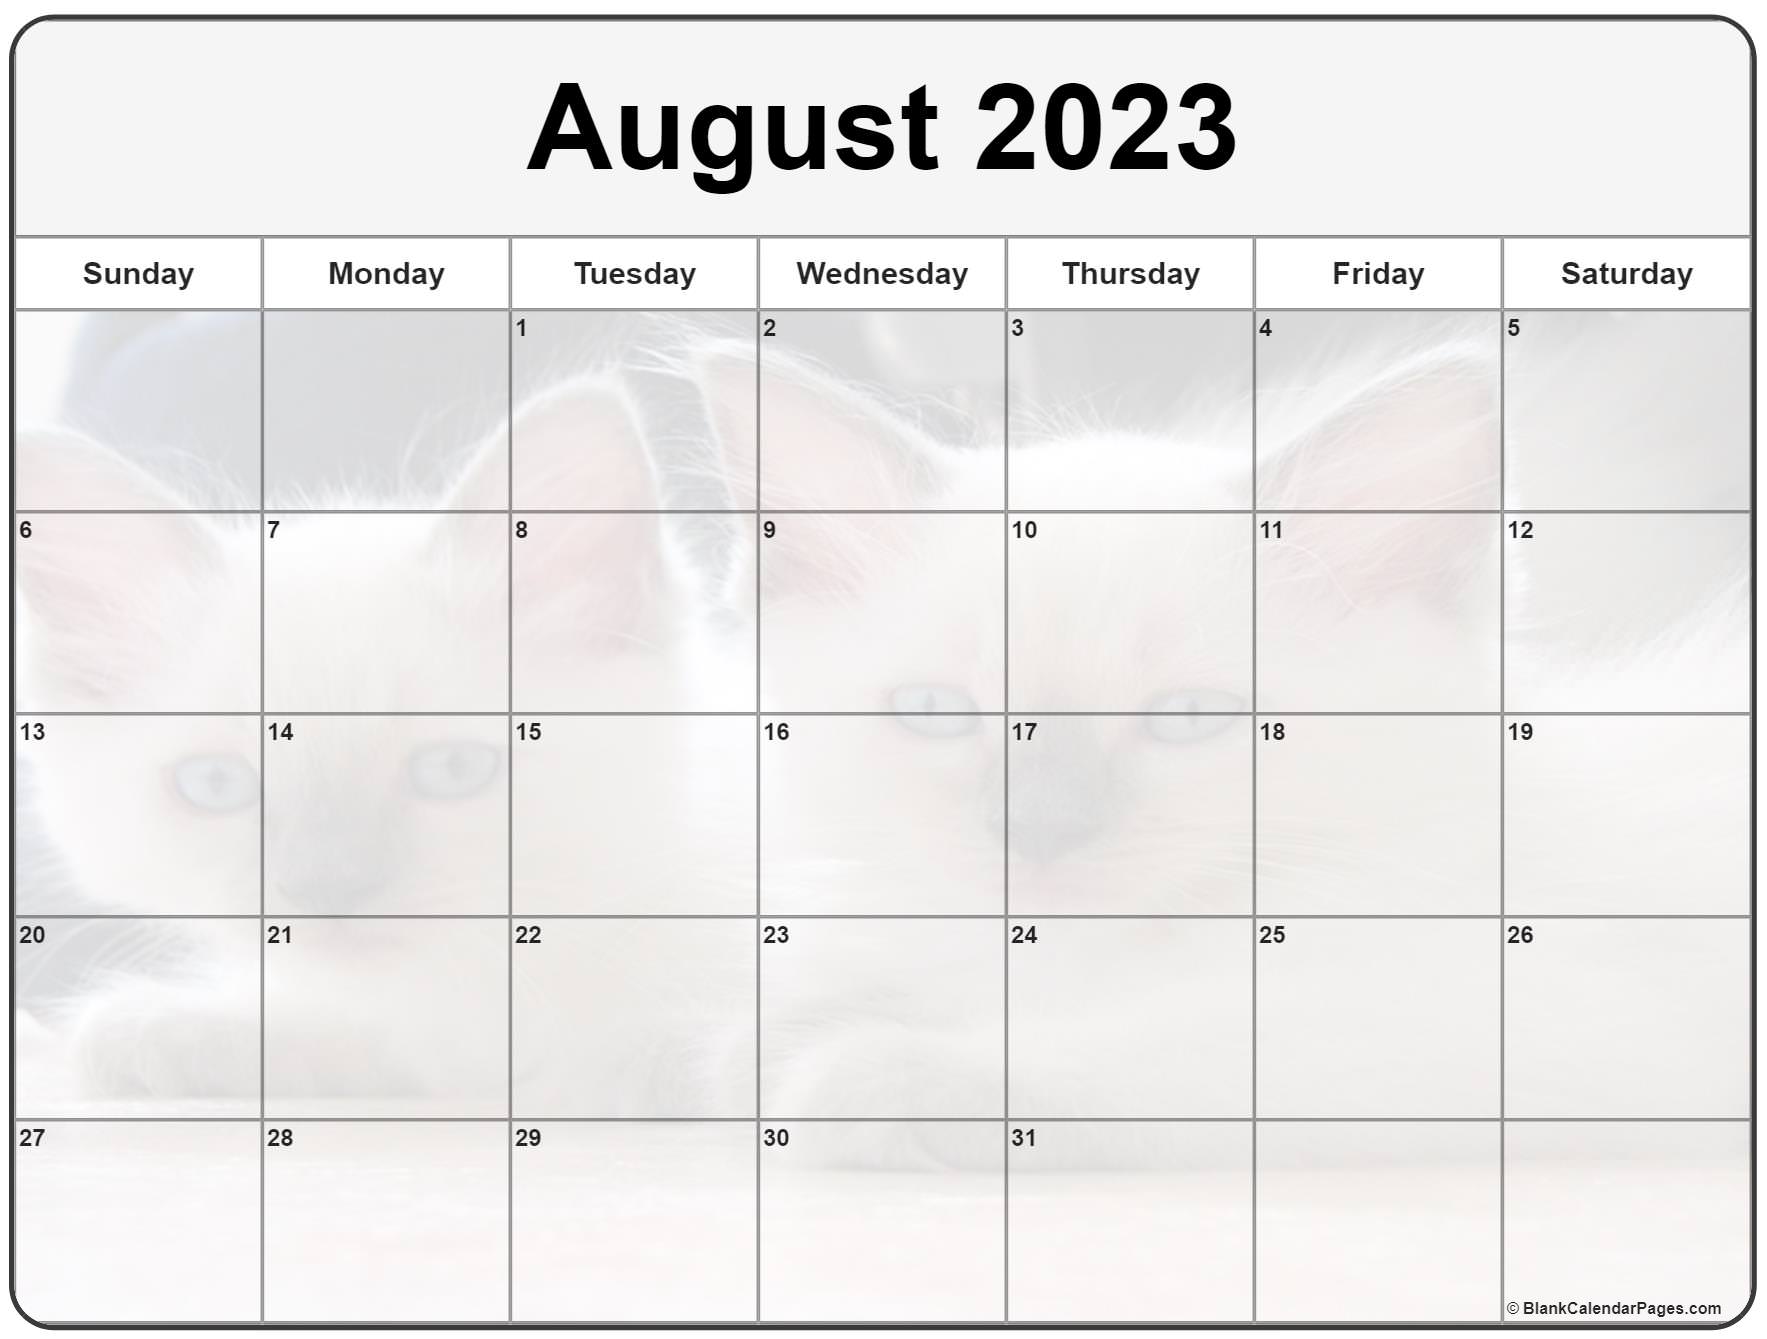 collection-of-august-2023-photo-calendars-with-image-filters